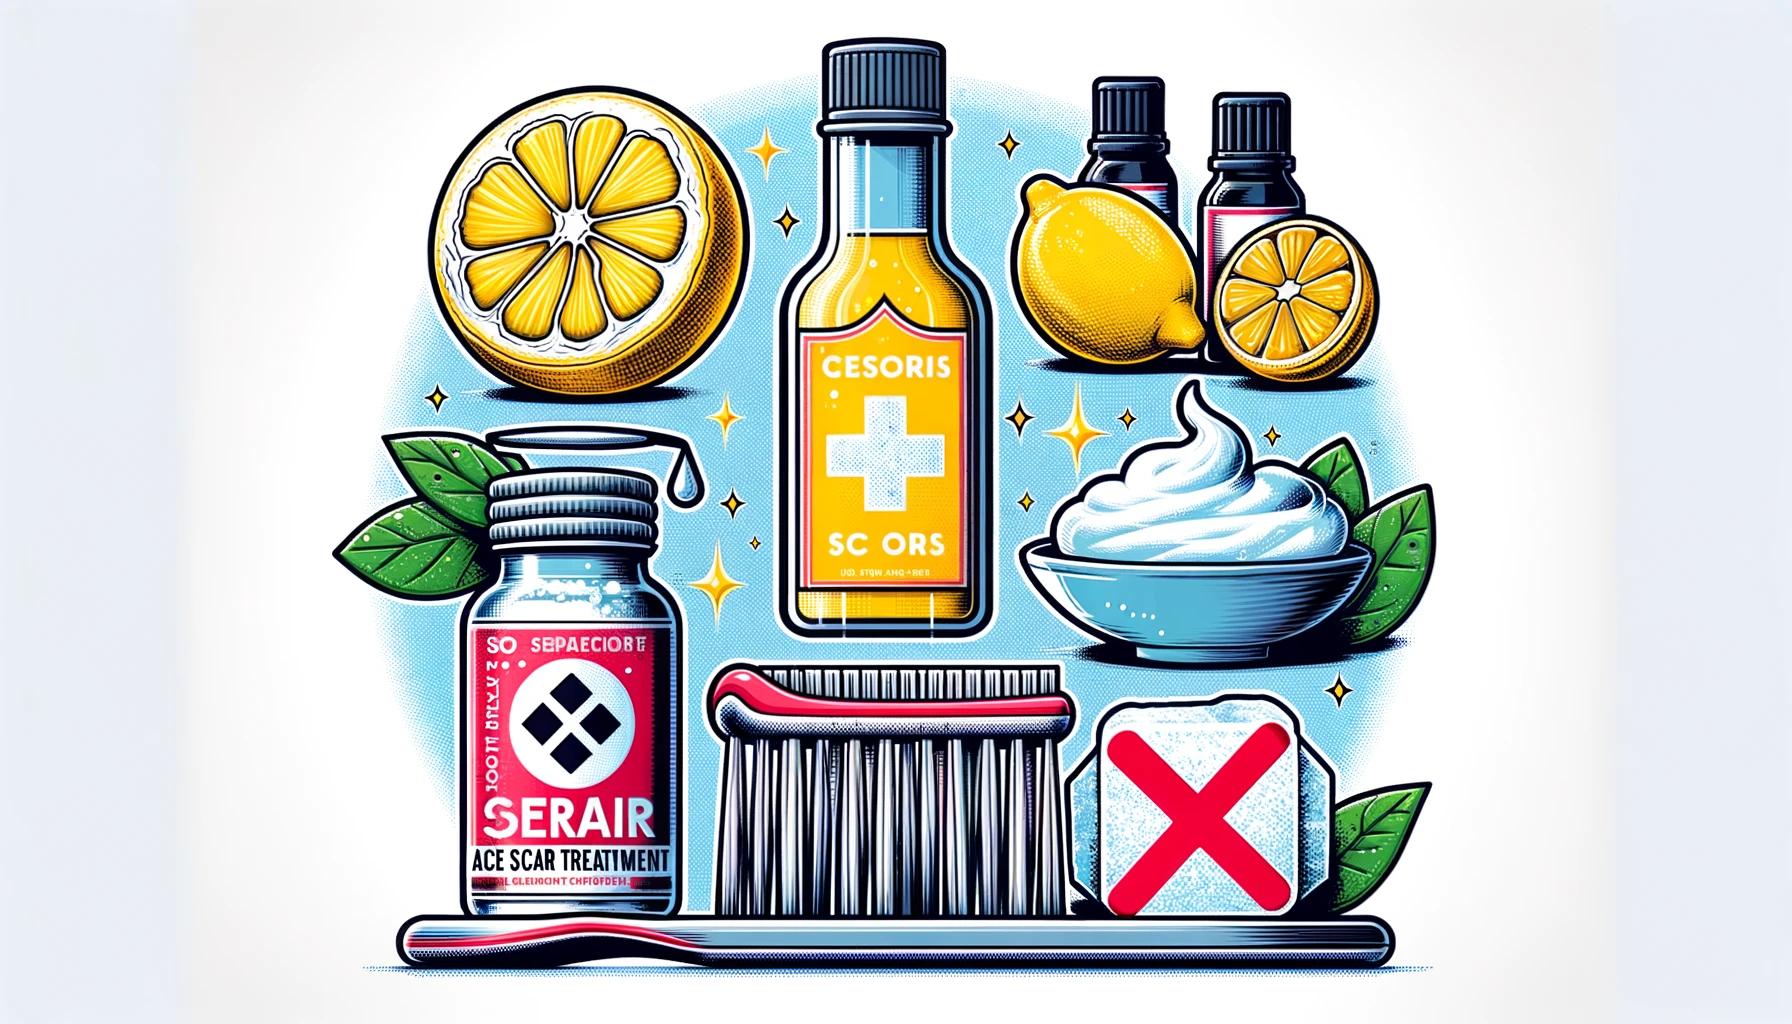 Debunked 5 Acne Scar Remedies That Are a Waste of Time and Money